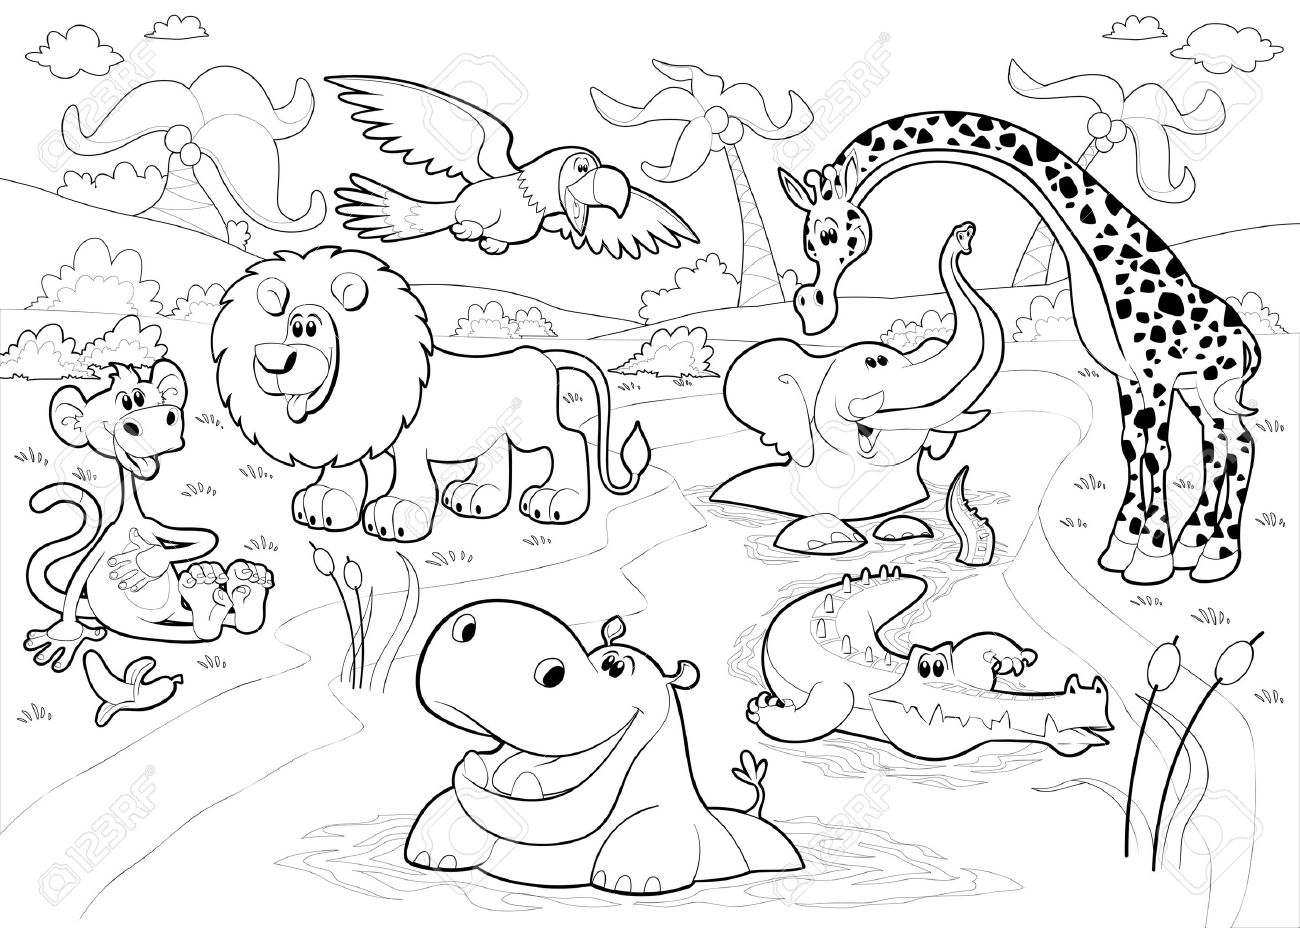 Jungle animals clipart black and white 3 » Clipart Station.